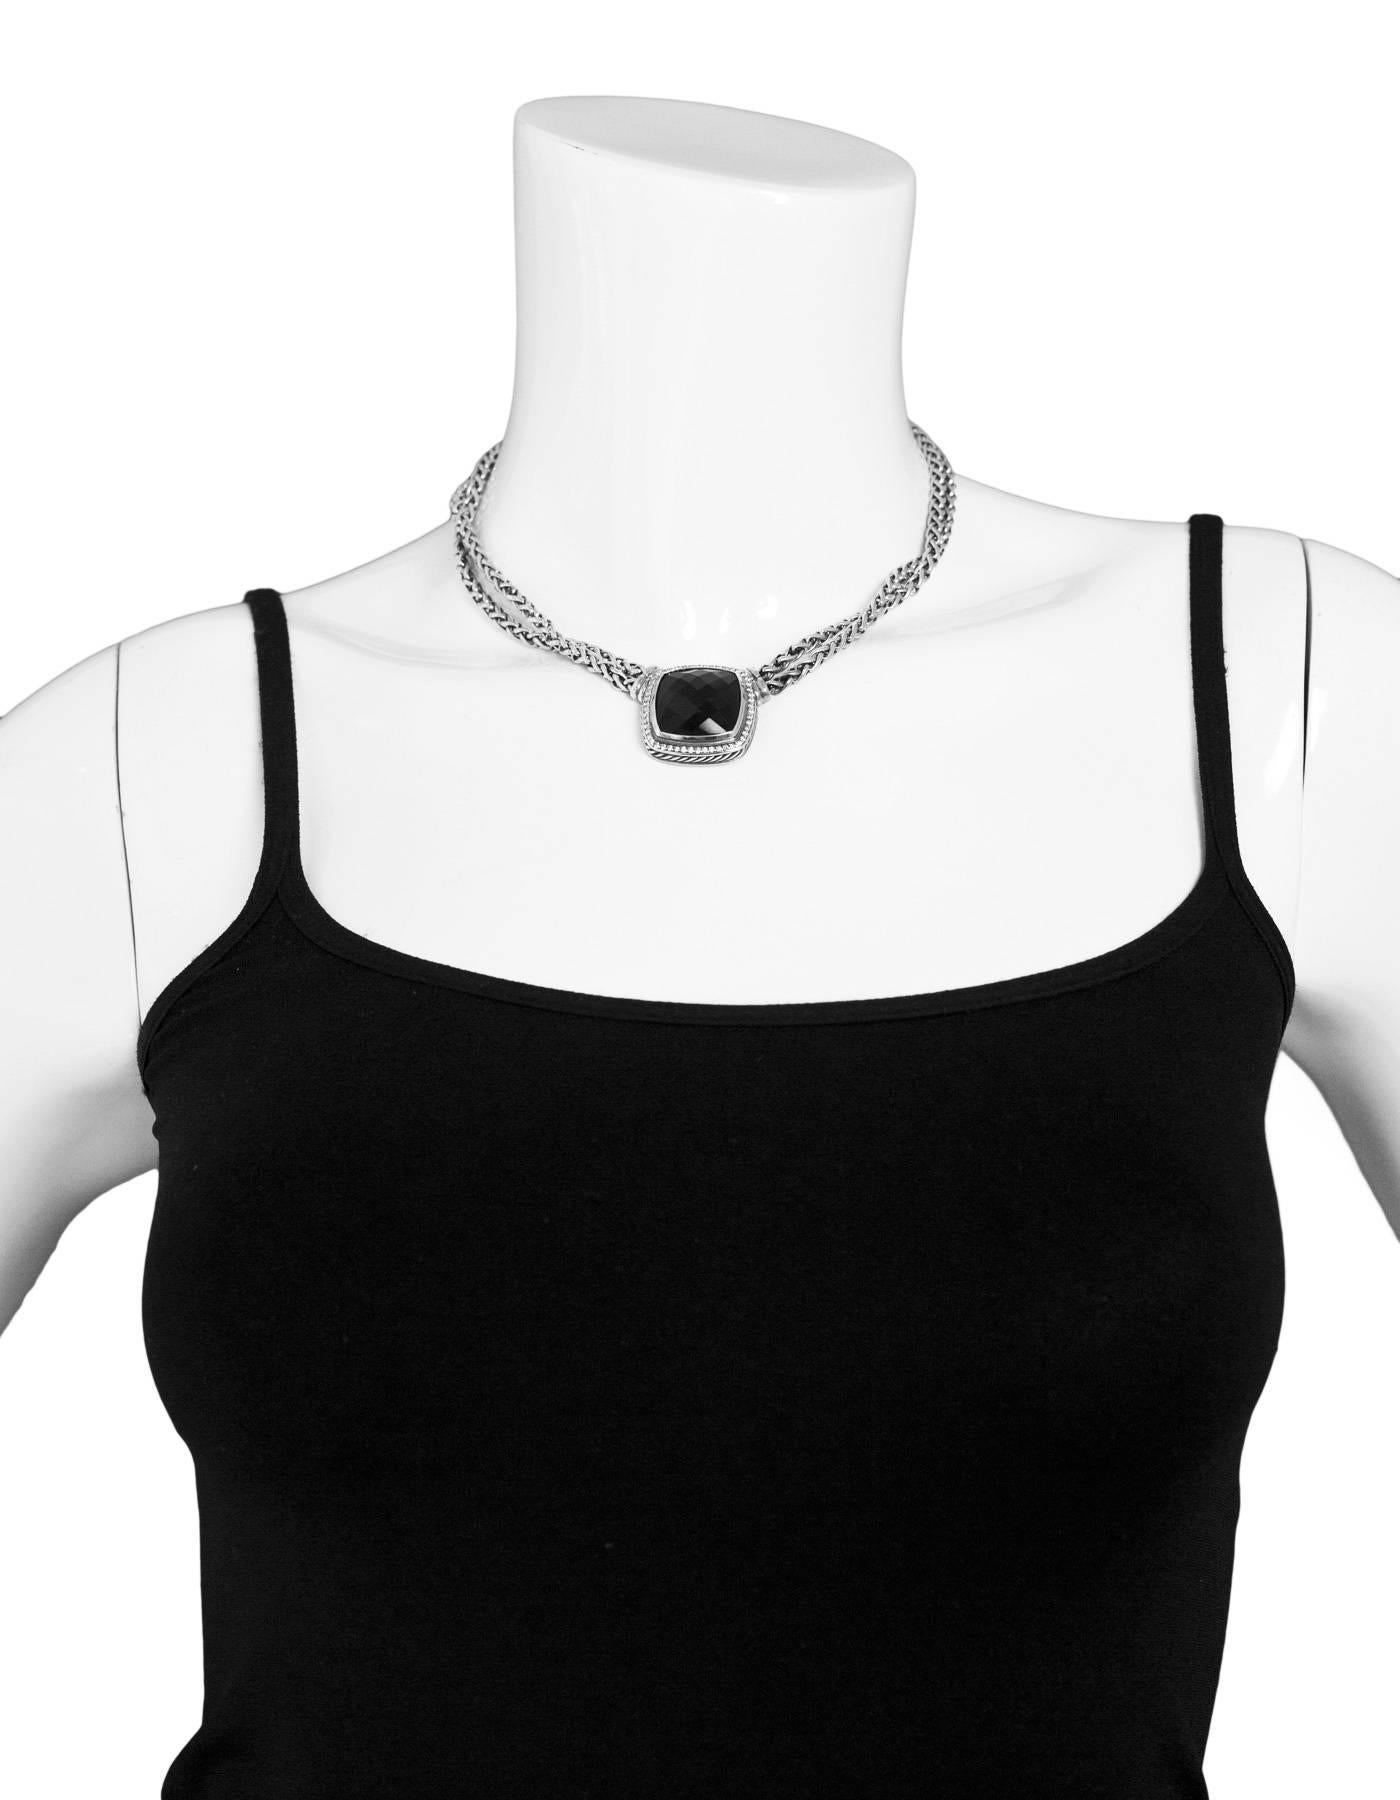 David Yurman Sterling, 14k White Gold & Onyx XL Albion Necklace
Features pave diamonds and double wheat chain

Color: Black, white, silver
Materials: 14k white gold, sterling silver, onyx and diamonds
Stamp: DY 925 750 585
Overall Condition: